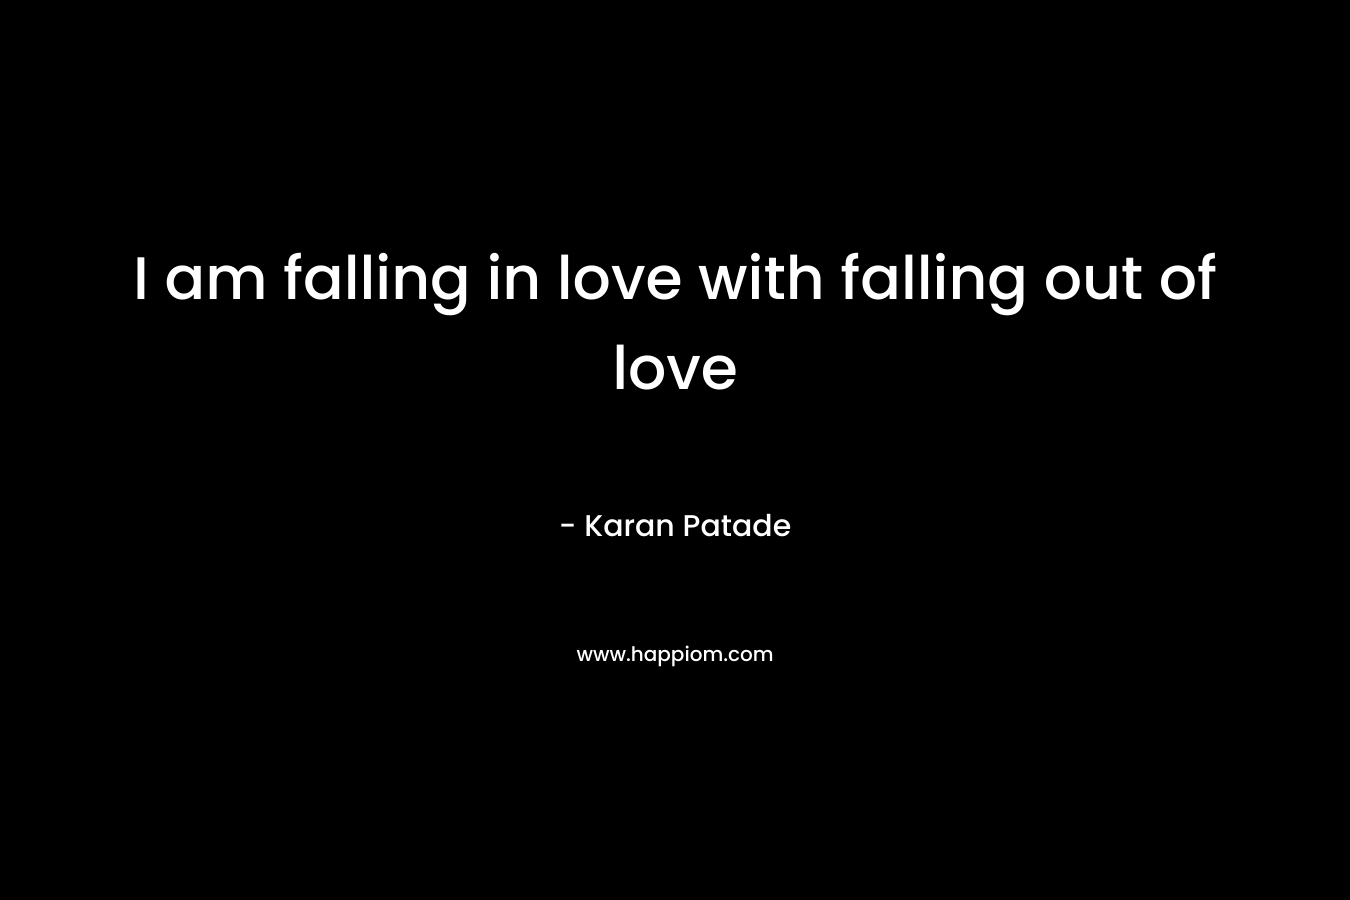 I am falling in love with falling out of love